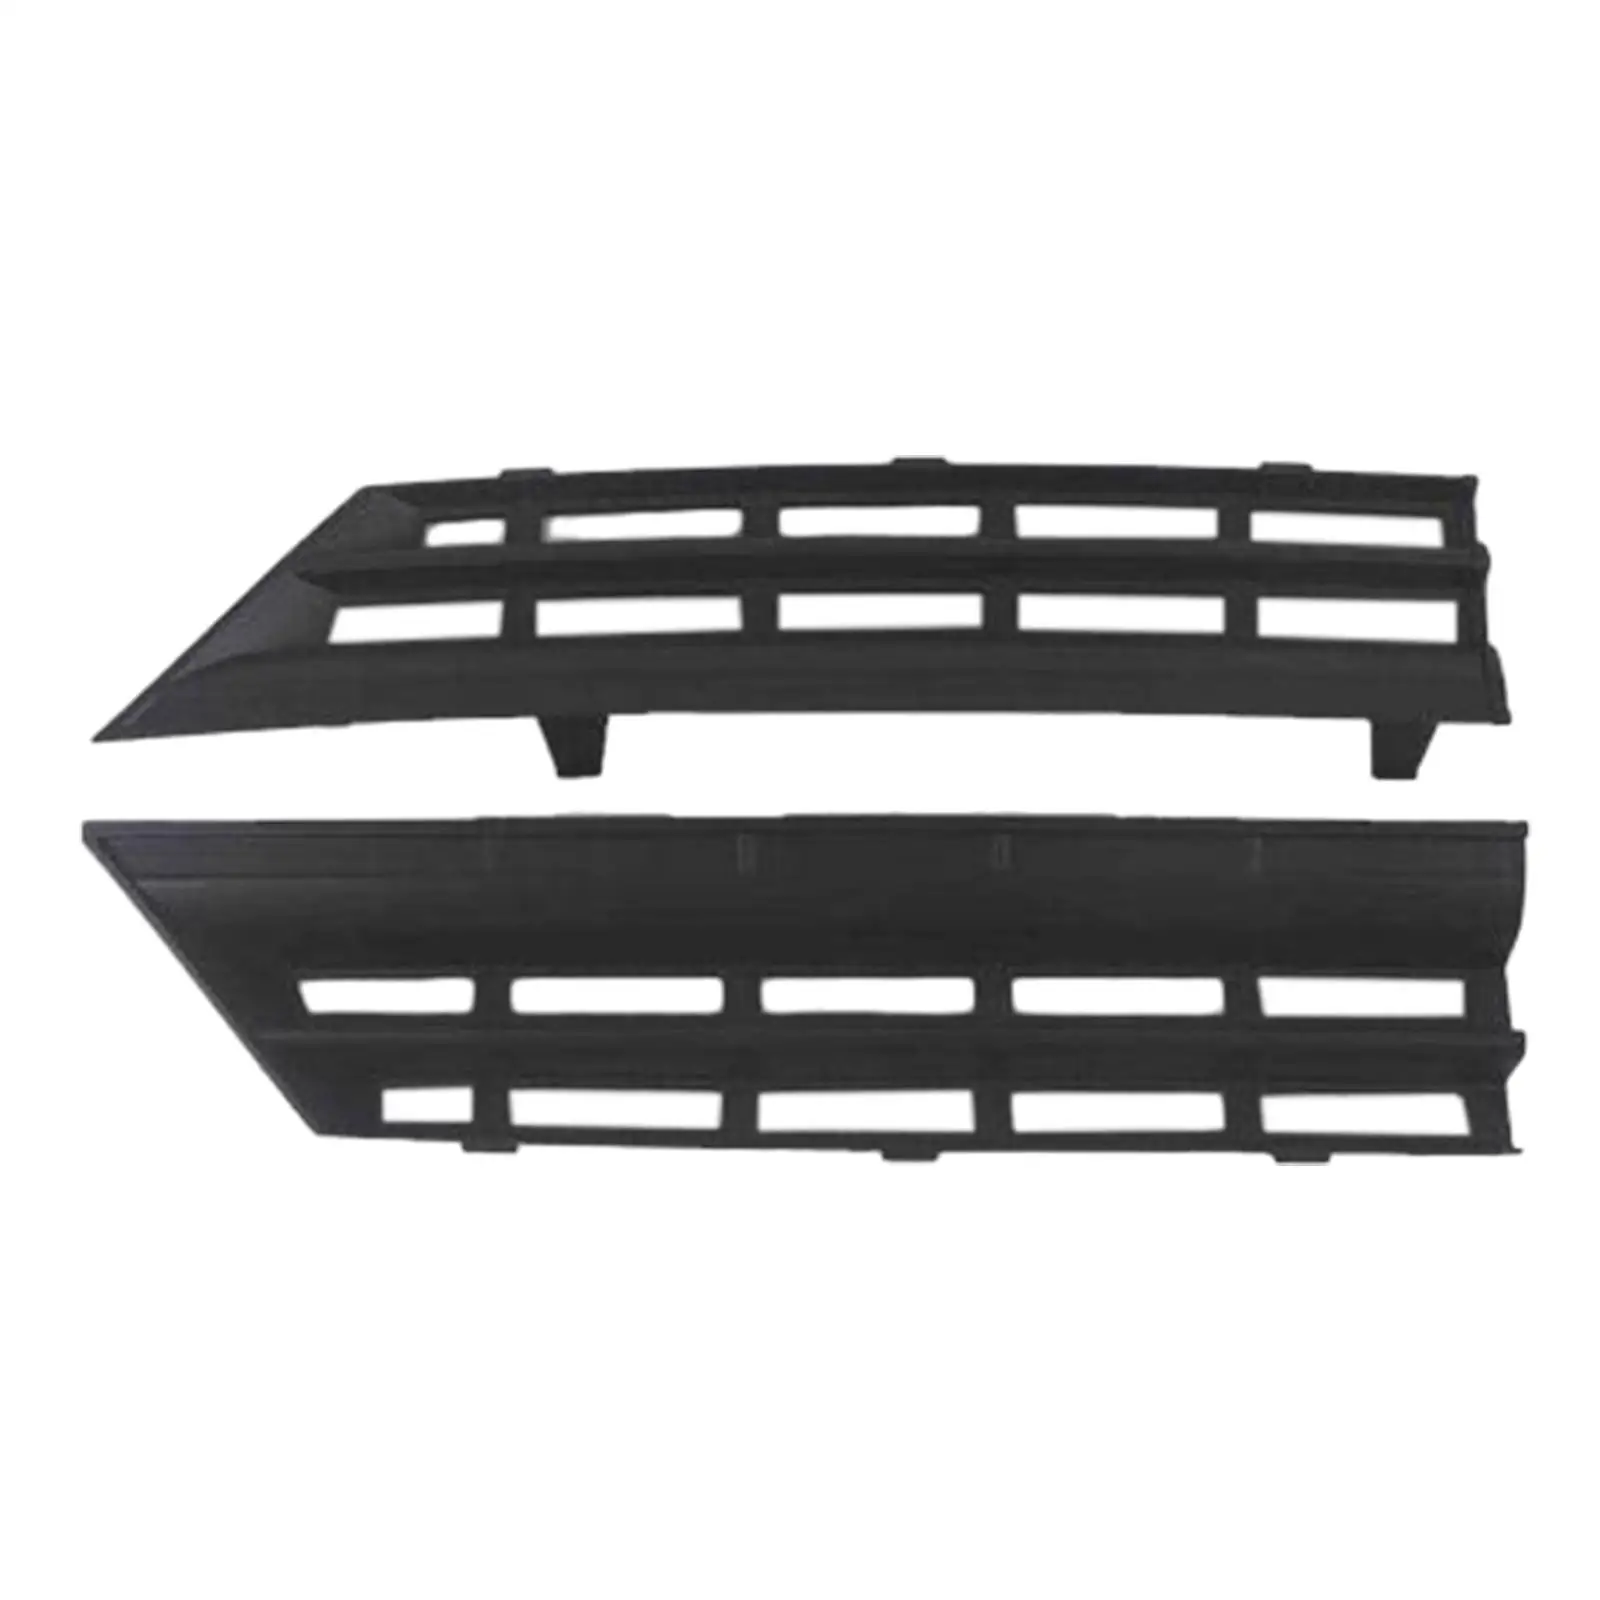 Front Grille Mesh High Performance for Byd Dolphin Auto Accessory